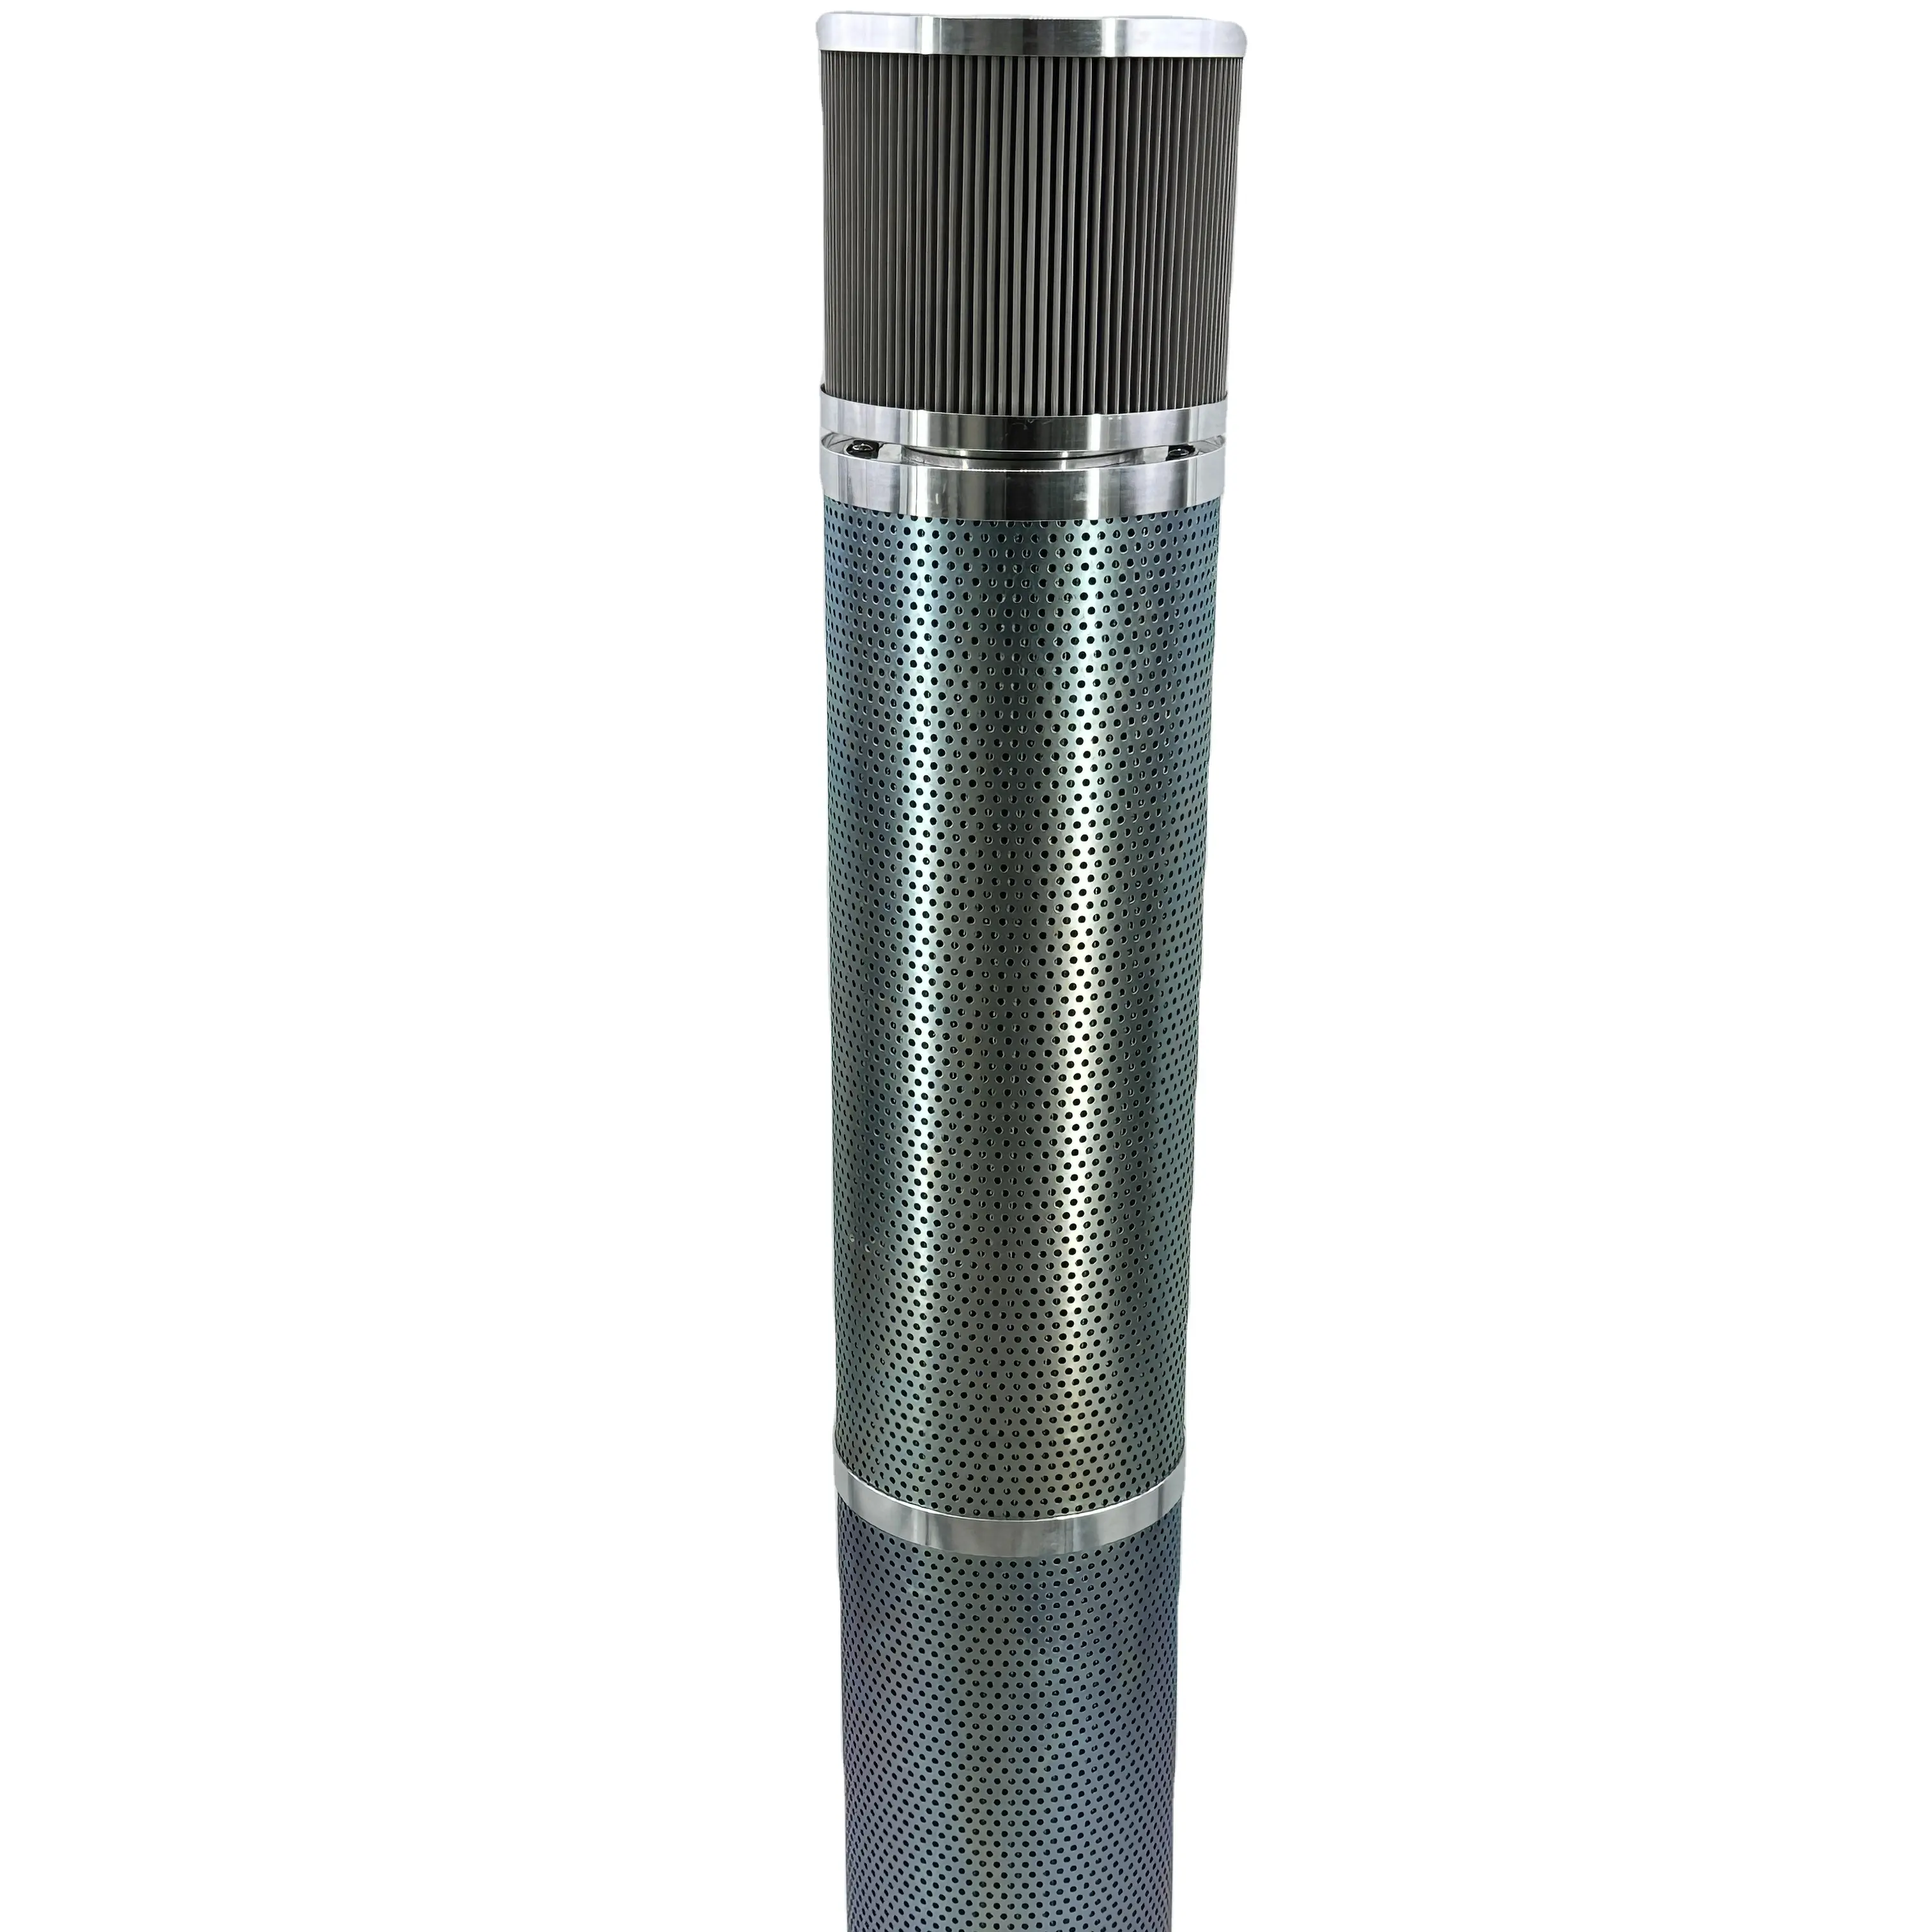 Hydraulic Oil Stainless Filter Element For Wind Turbine Gearbox And Wind Turbine Generator Set WH8300FKS24H WH8300FKS39H W